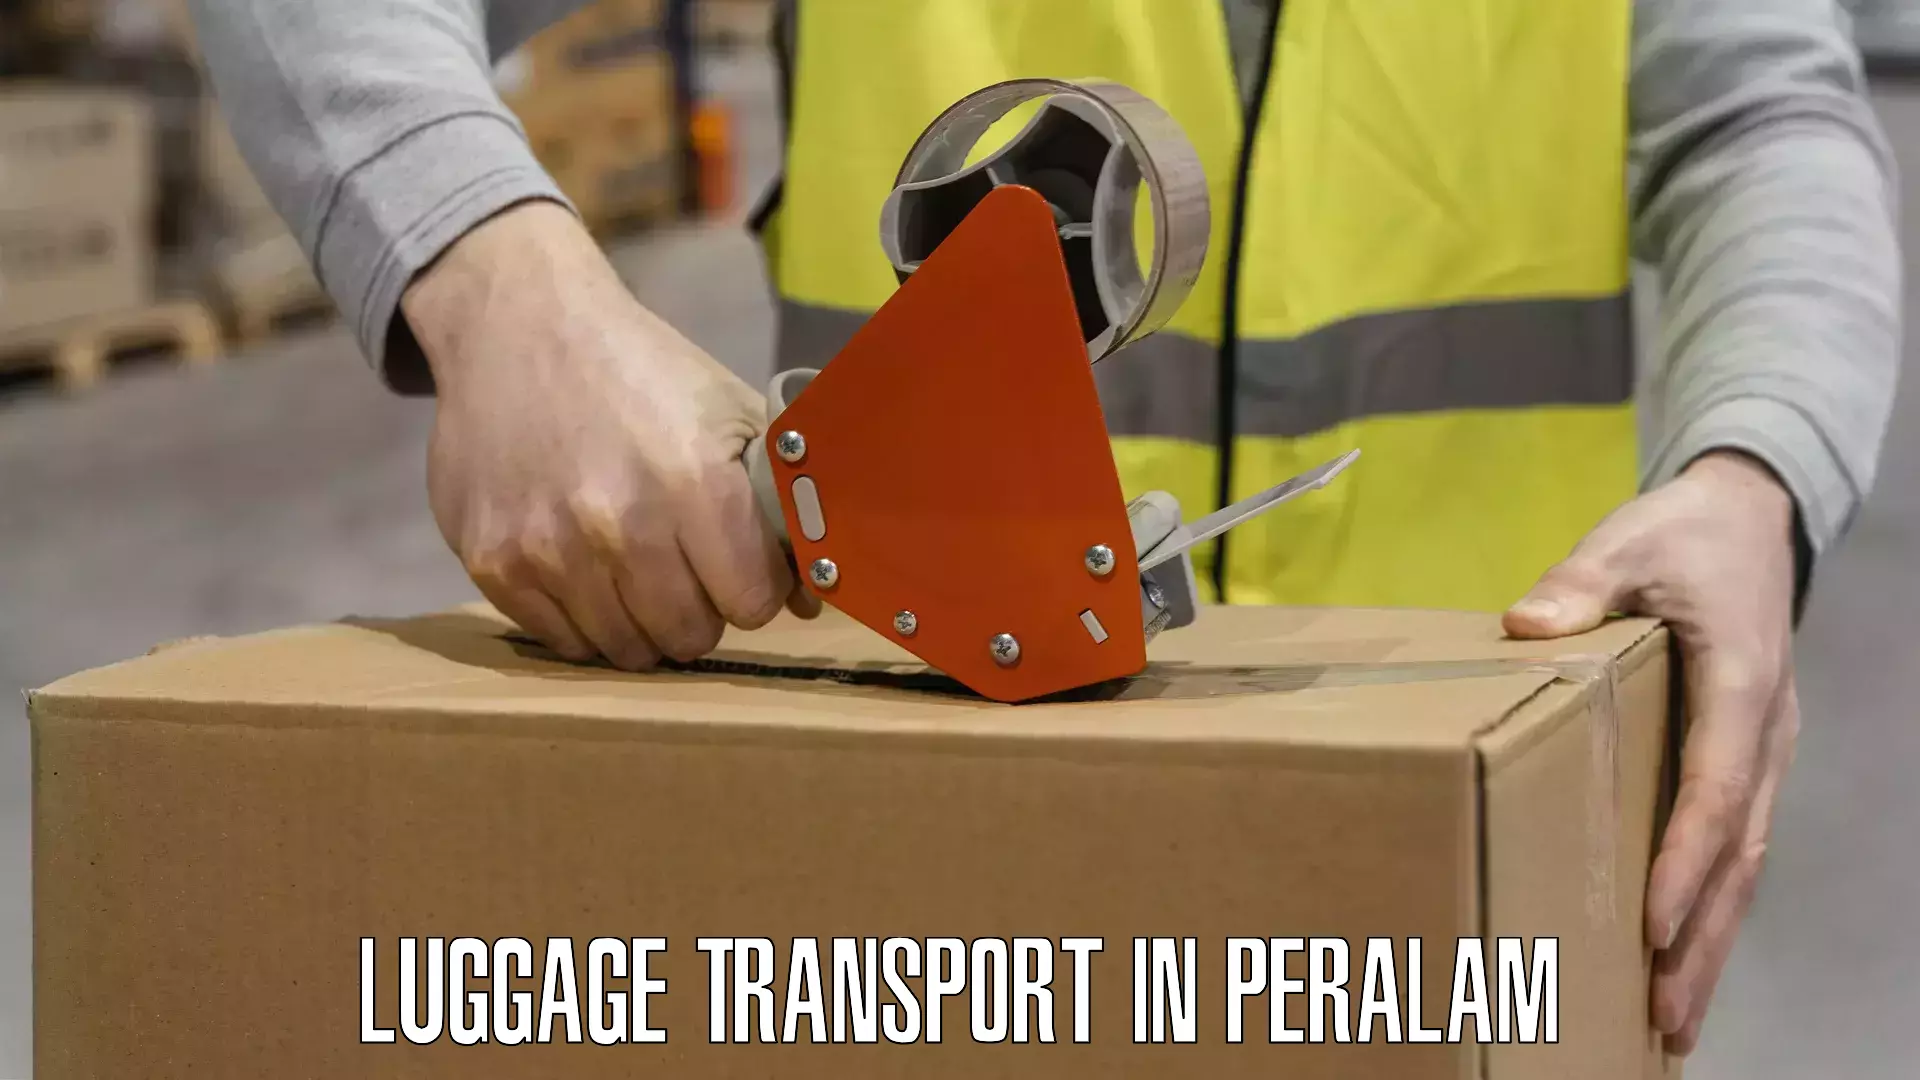 Luggage delivery operations in Peralam